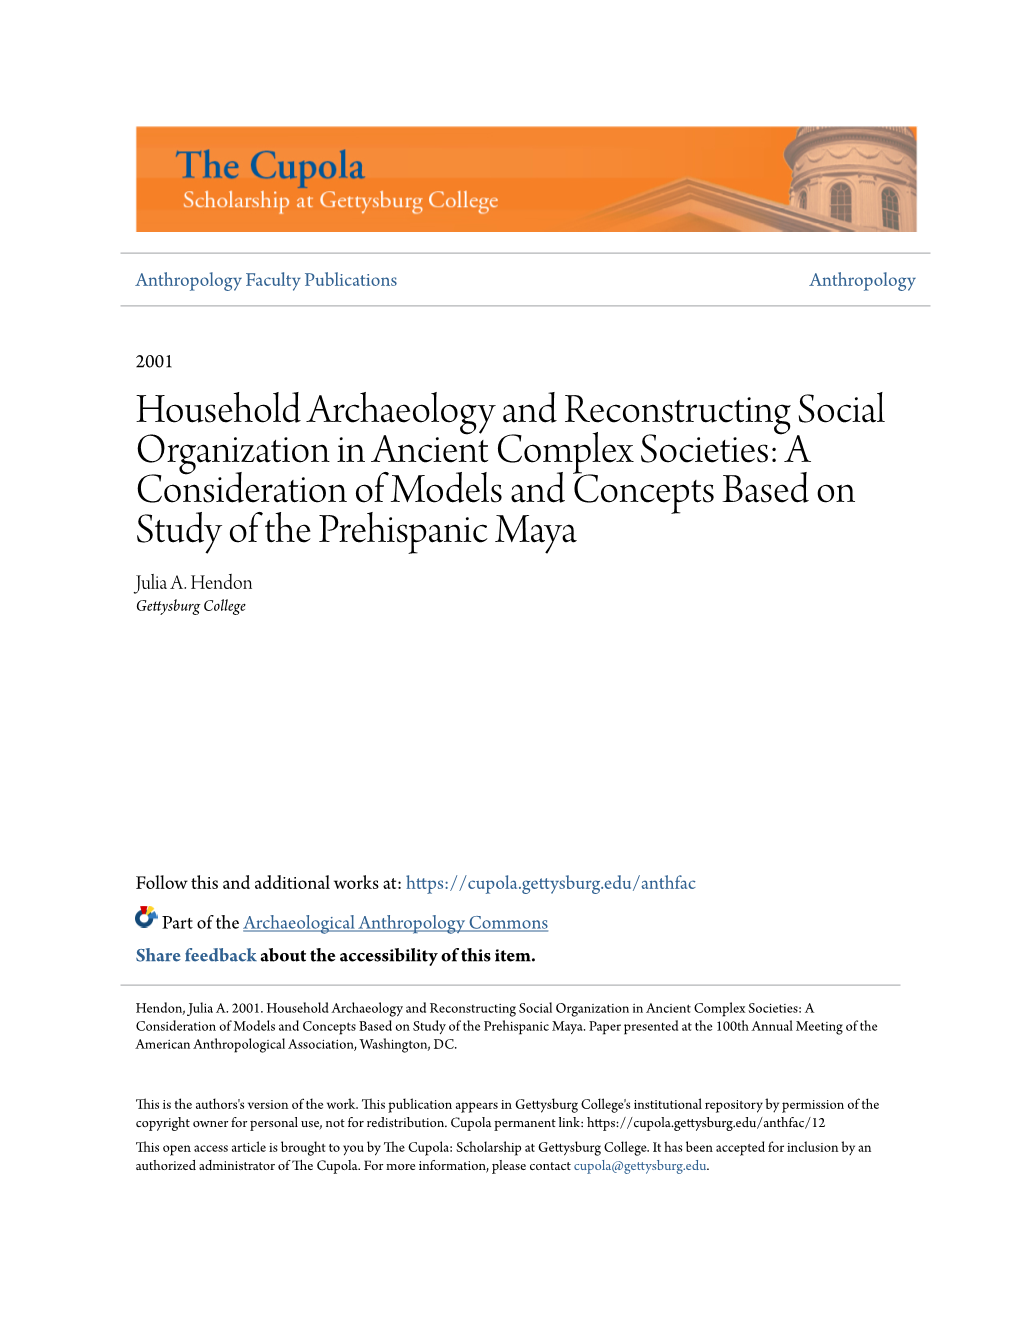 Household Archaeology and Reconstructing Social Organization